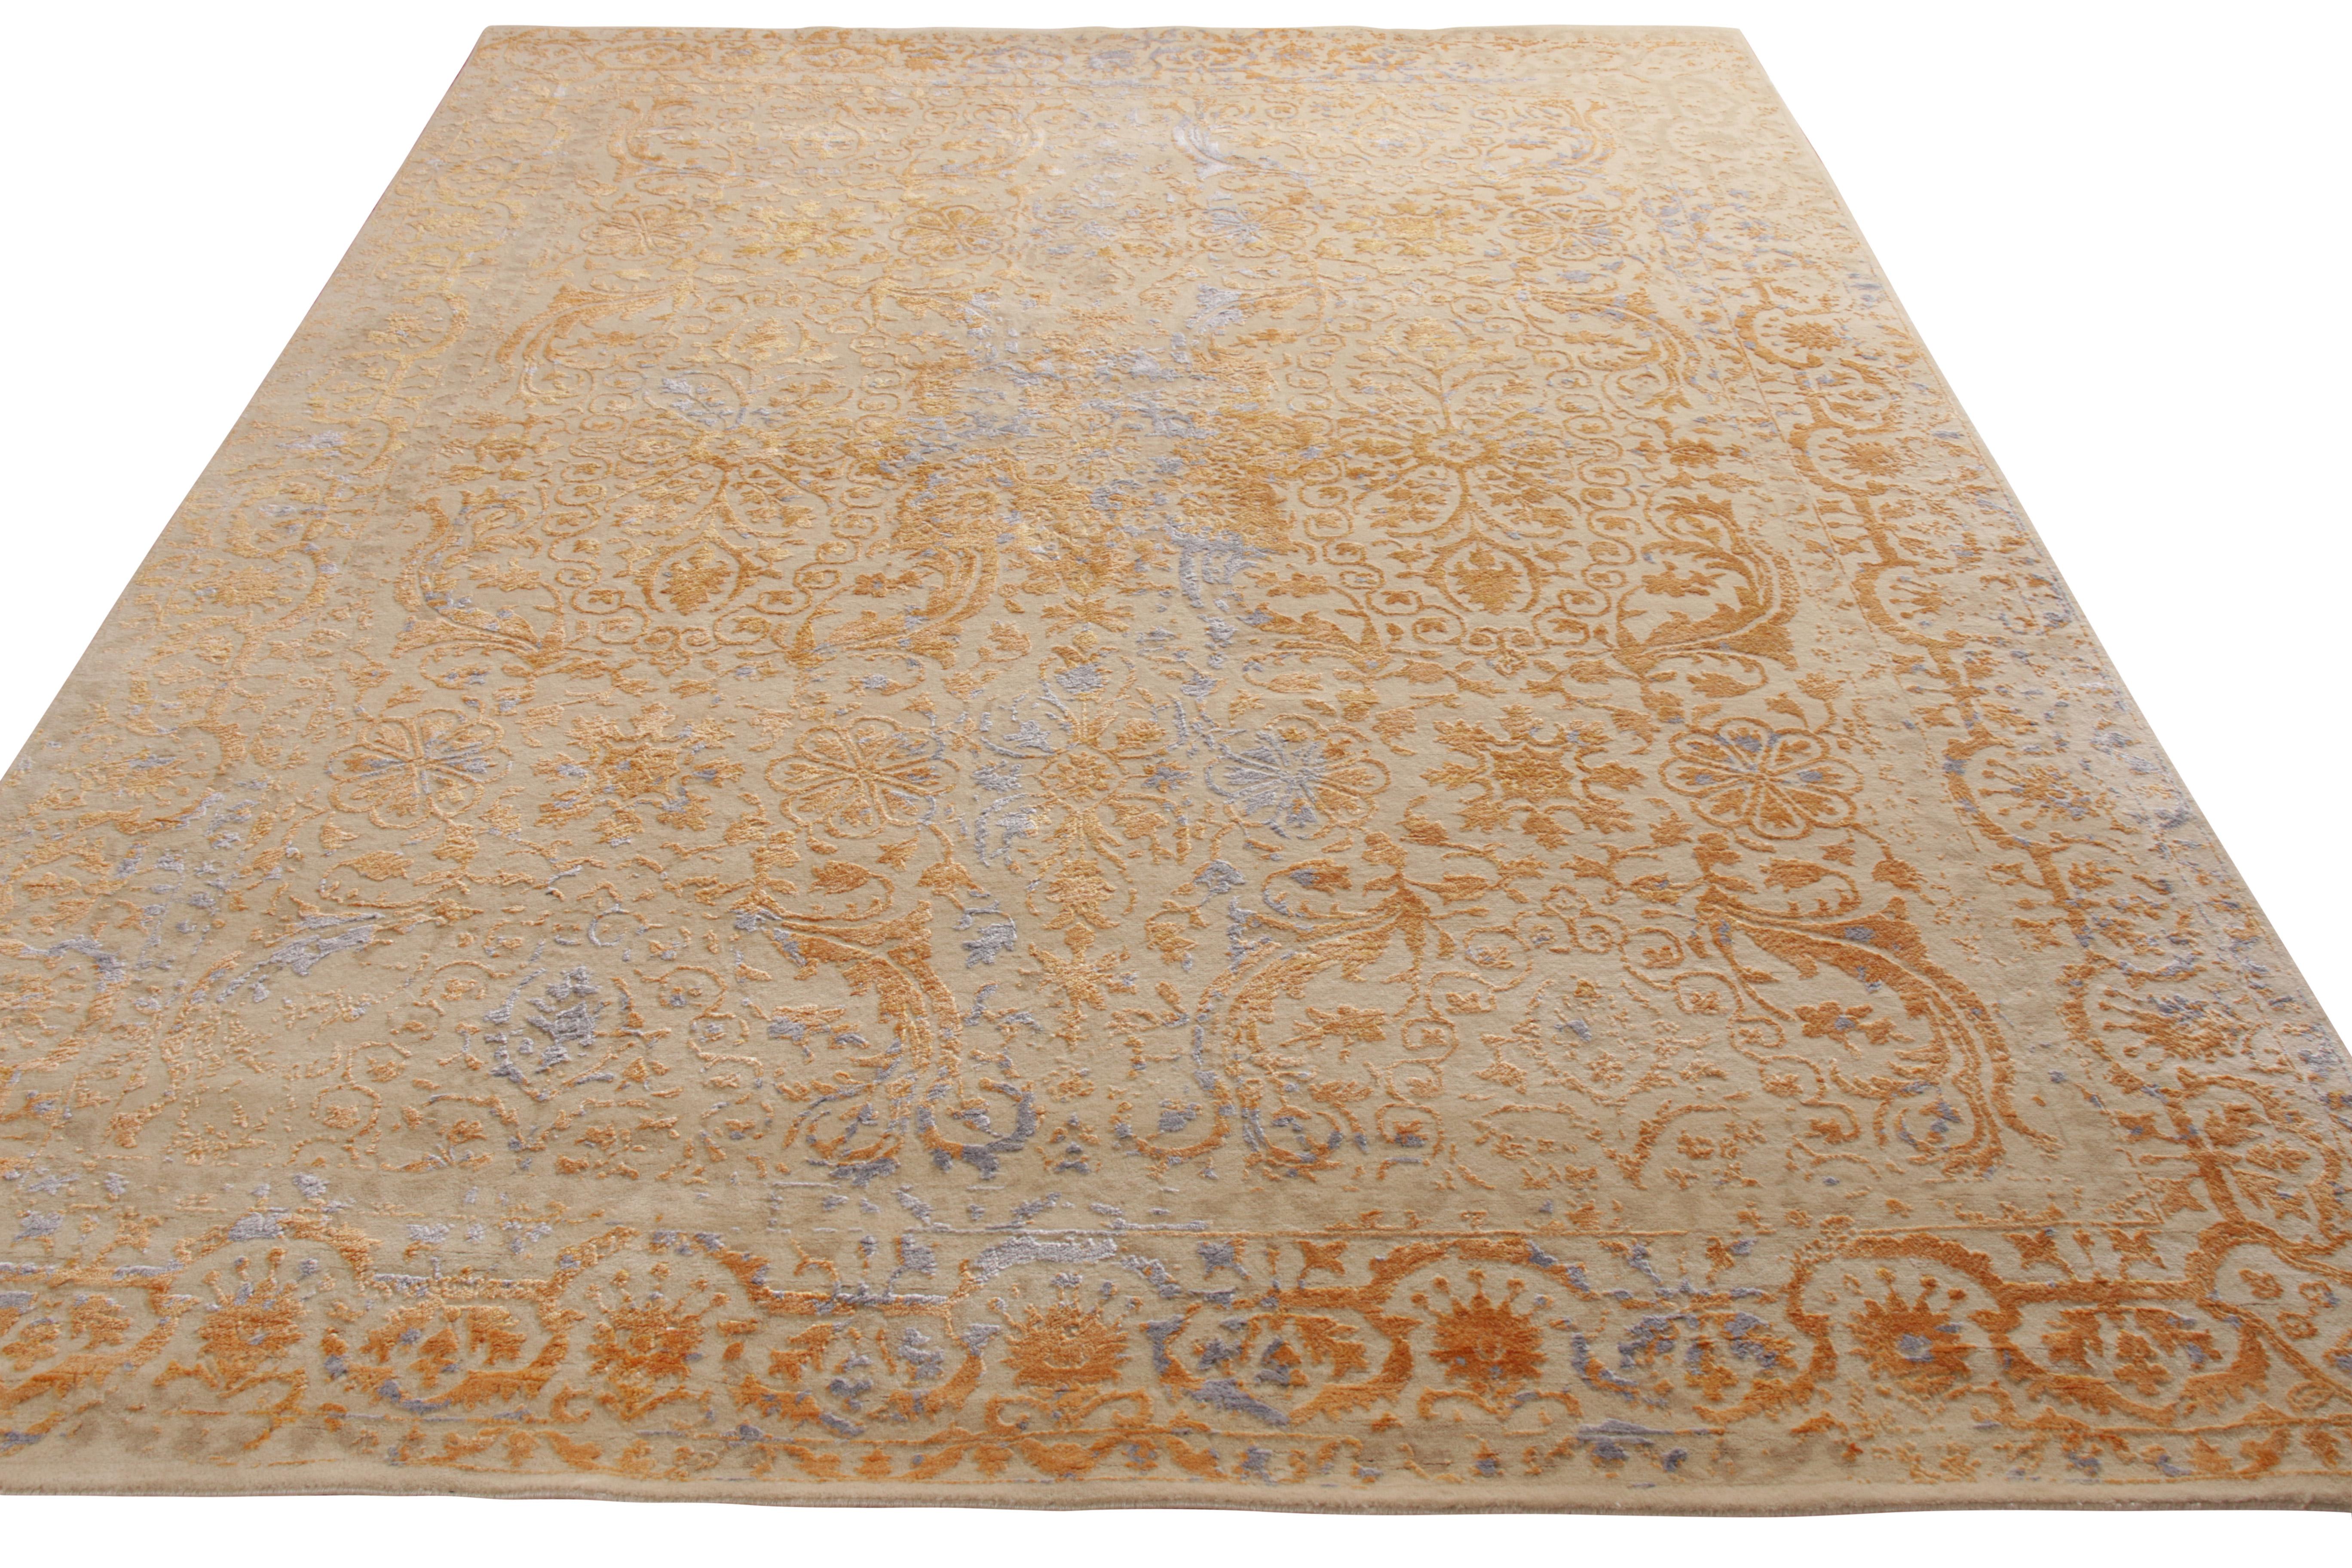 An 8x10 contemporary ode to transitional rug styles, from the Modern Classics Collection by Rug & Kilim. Hand knotted in wool and all-natural silk, enjoying regal gold and silver atop beige in a textural high-low floral pattern. Especially unique in